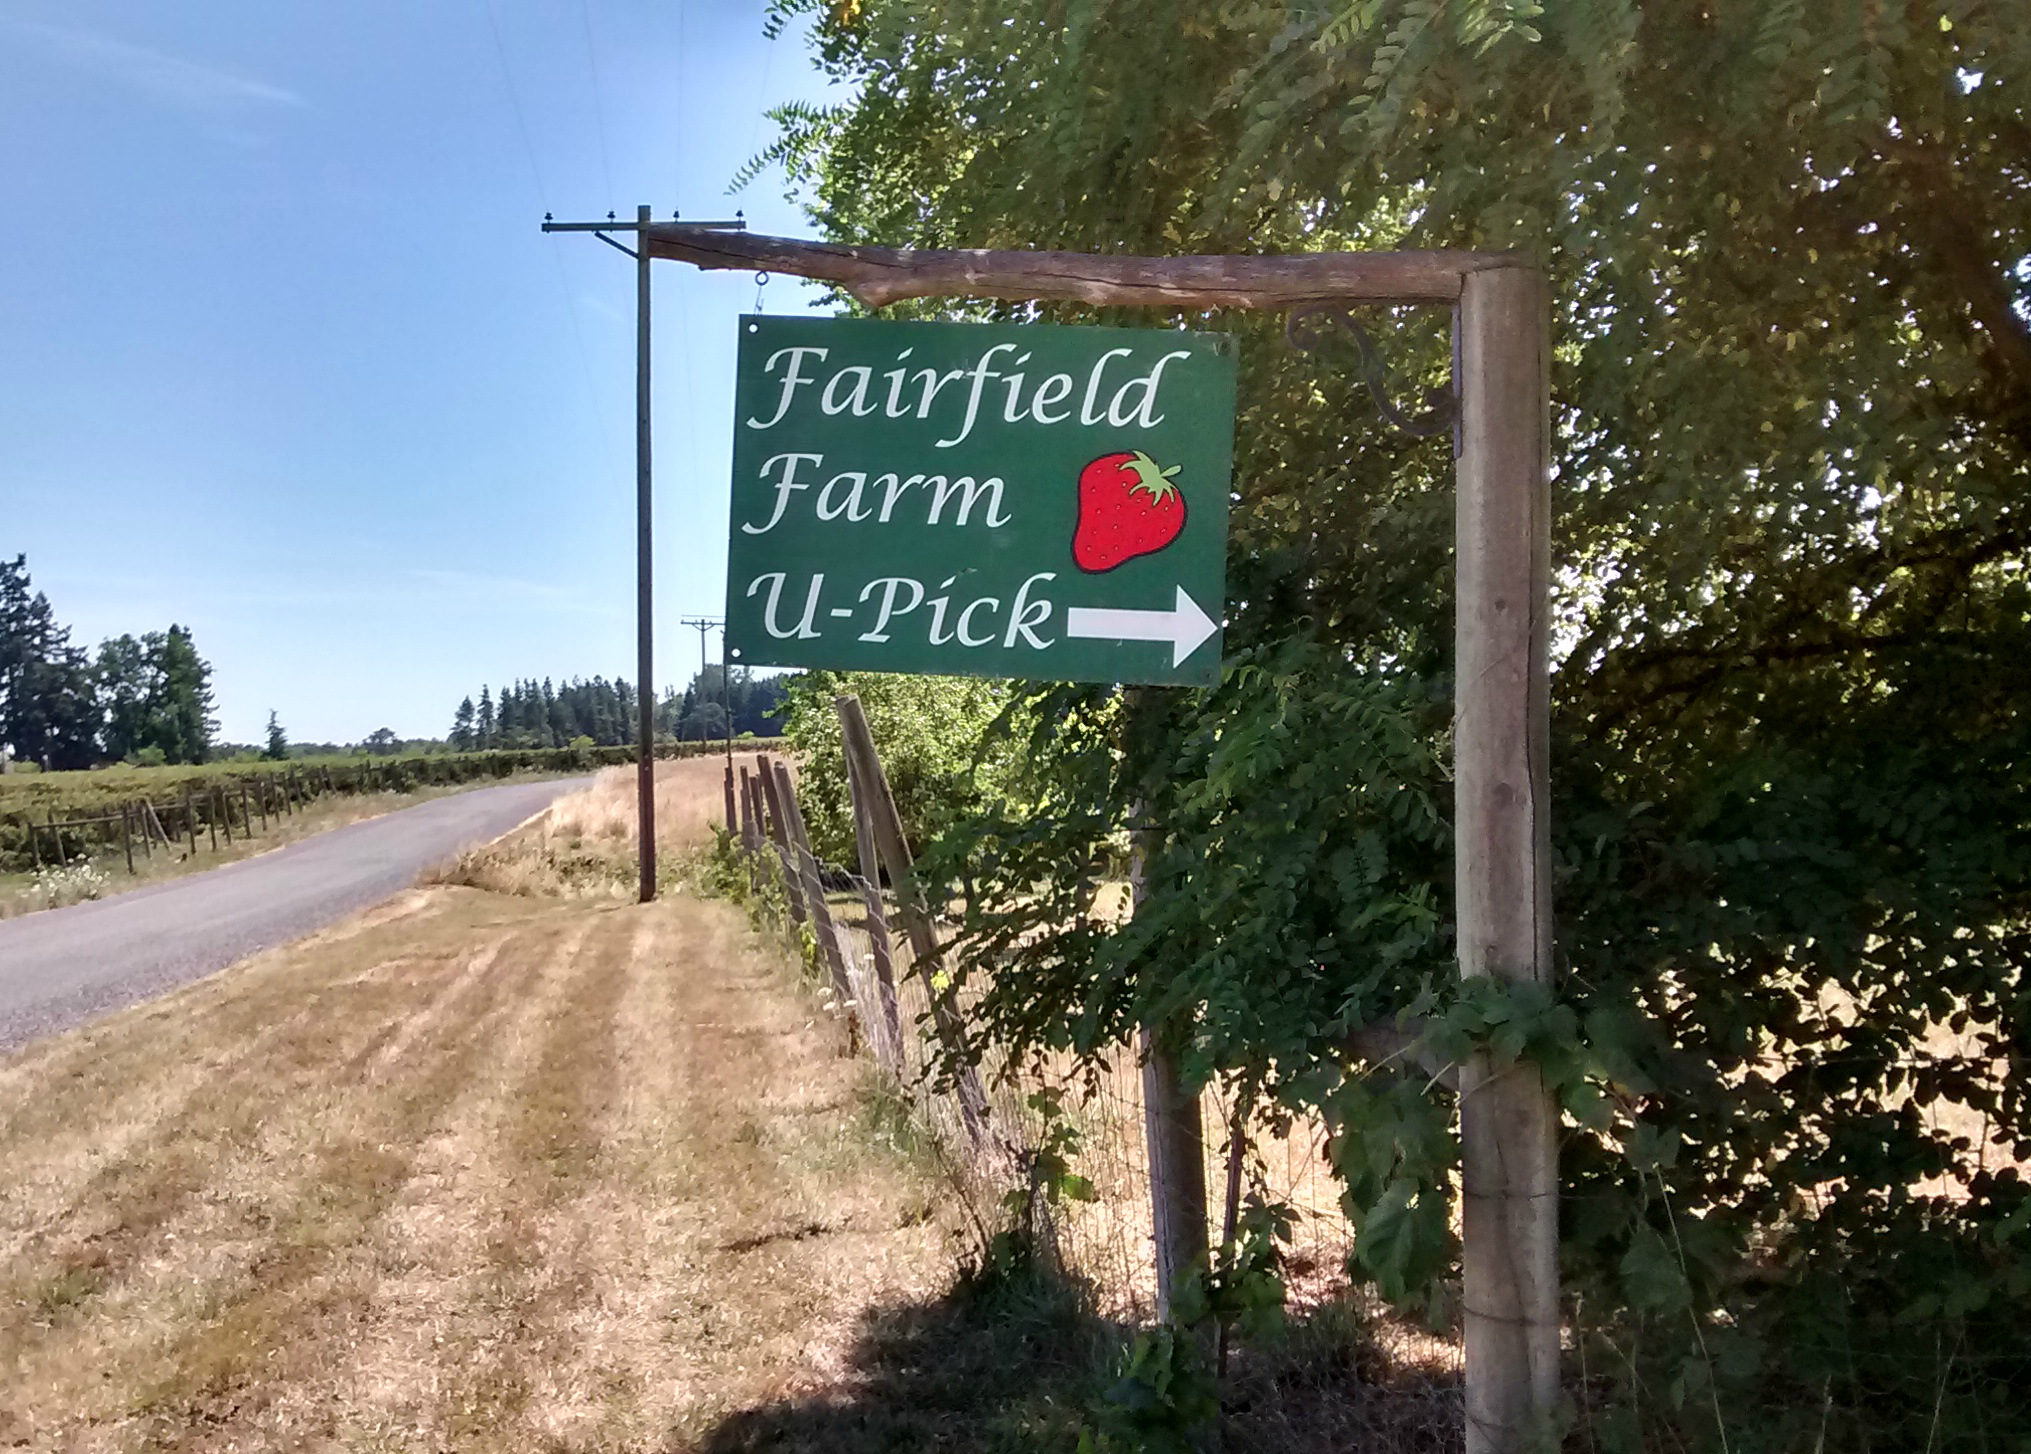 Fairfield Farm is located in the flyway between the Willamette River and Finley Wildlife refuge